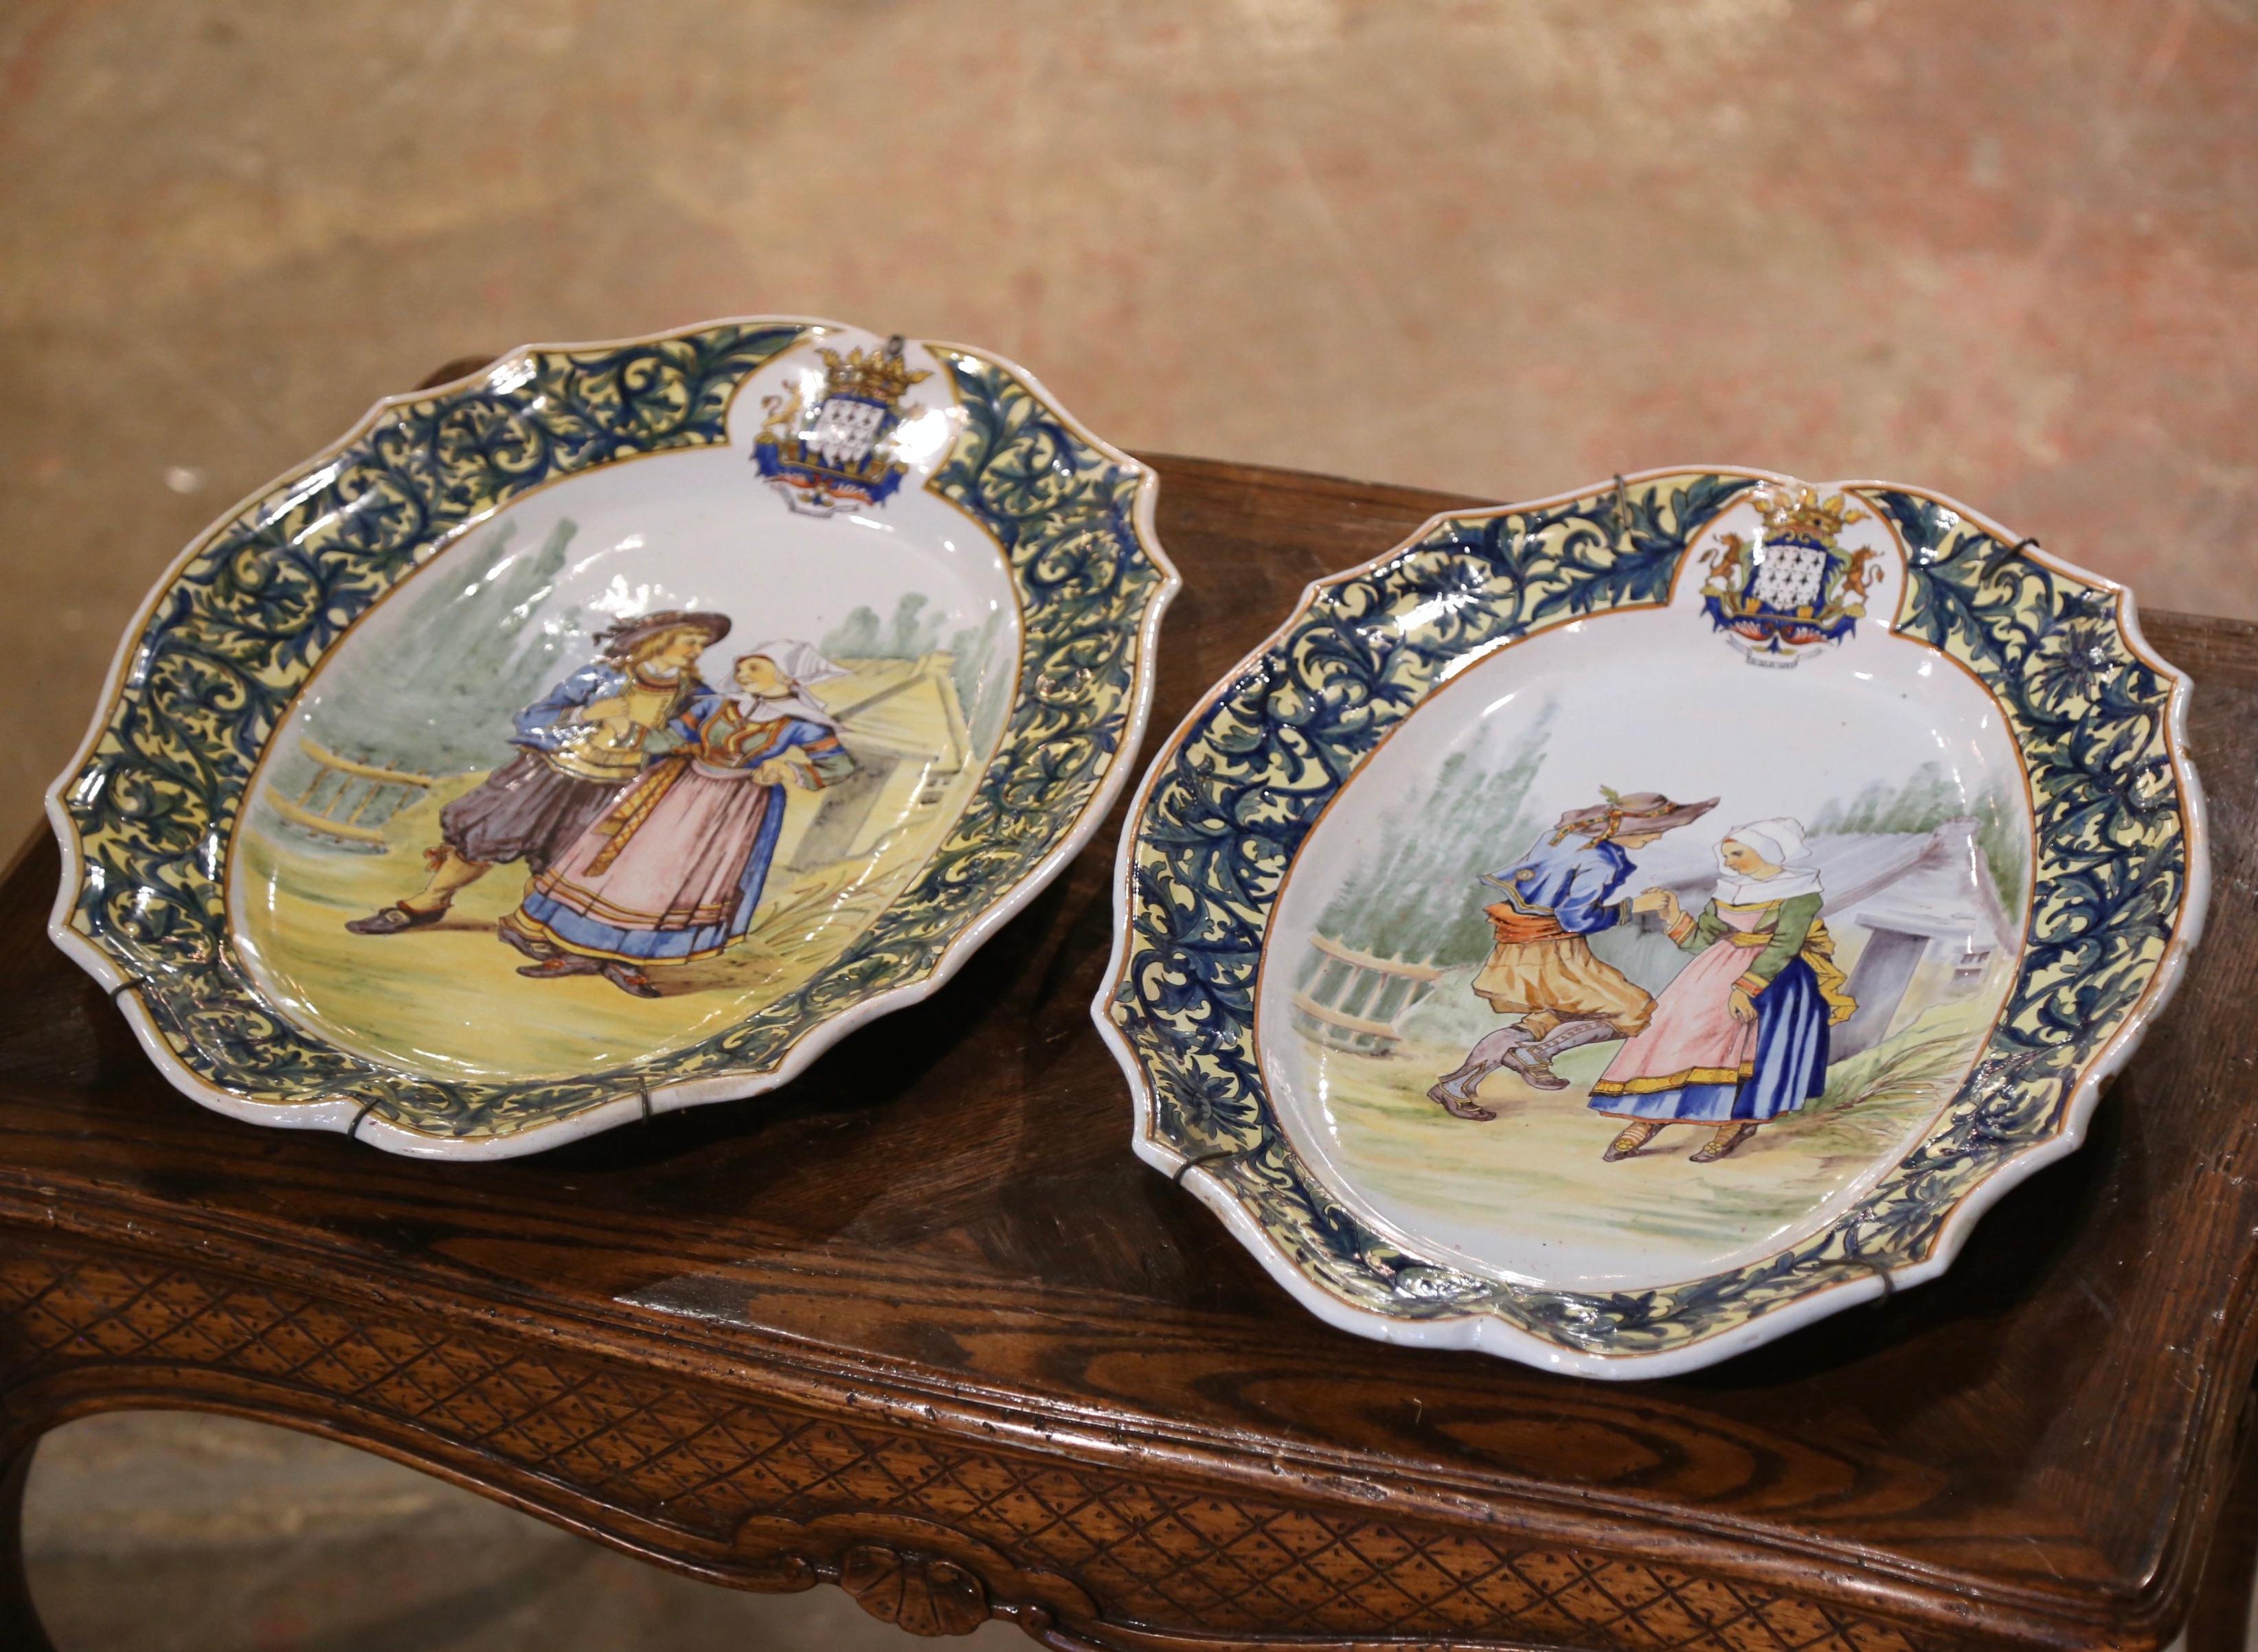 Decorate a kitchen wall or a shelf with this important pair of antique platters. Created by Porquier Beau in Quimper, France circa 1895, the large hand-painted ceramic plates depict traditional courting scenes with Breton people in attire costumes.